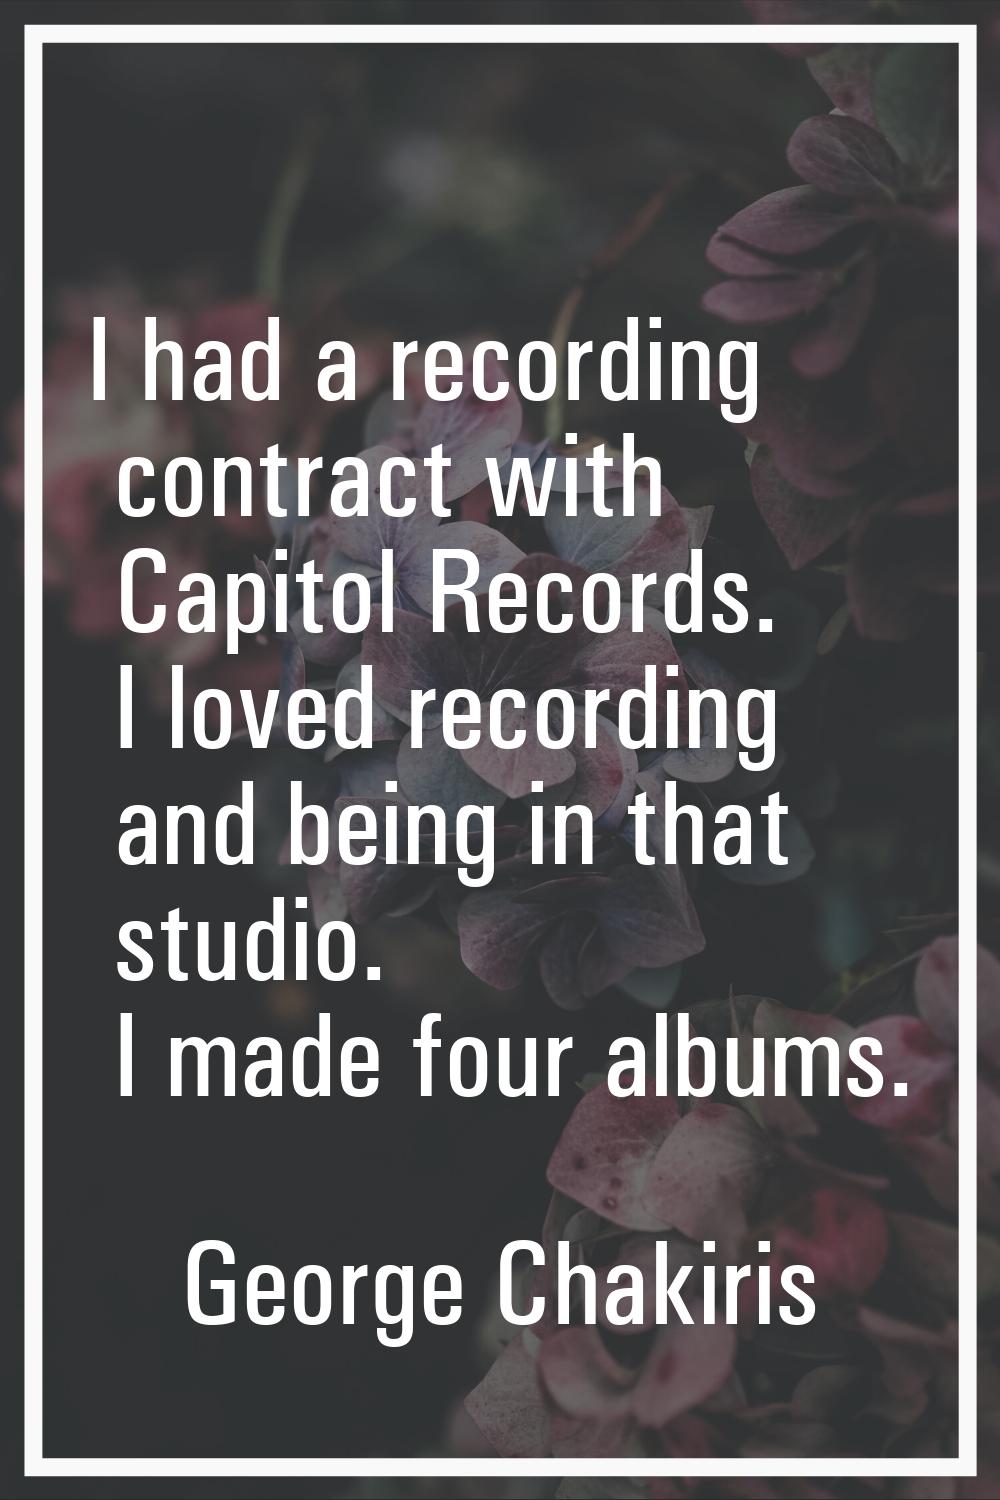 I had a recording contract with Capitol Records. I loved recording and being in that studio. I made